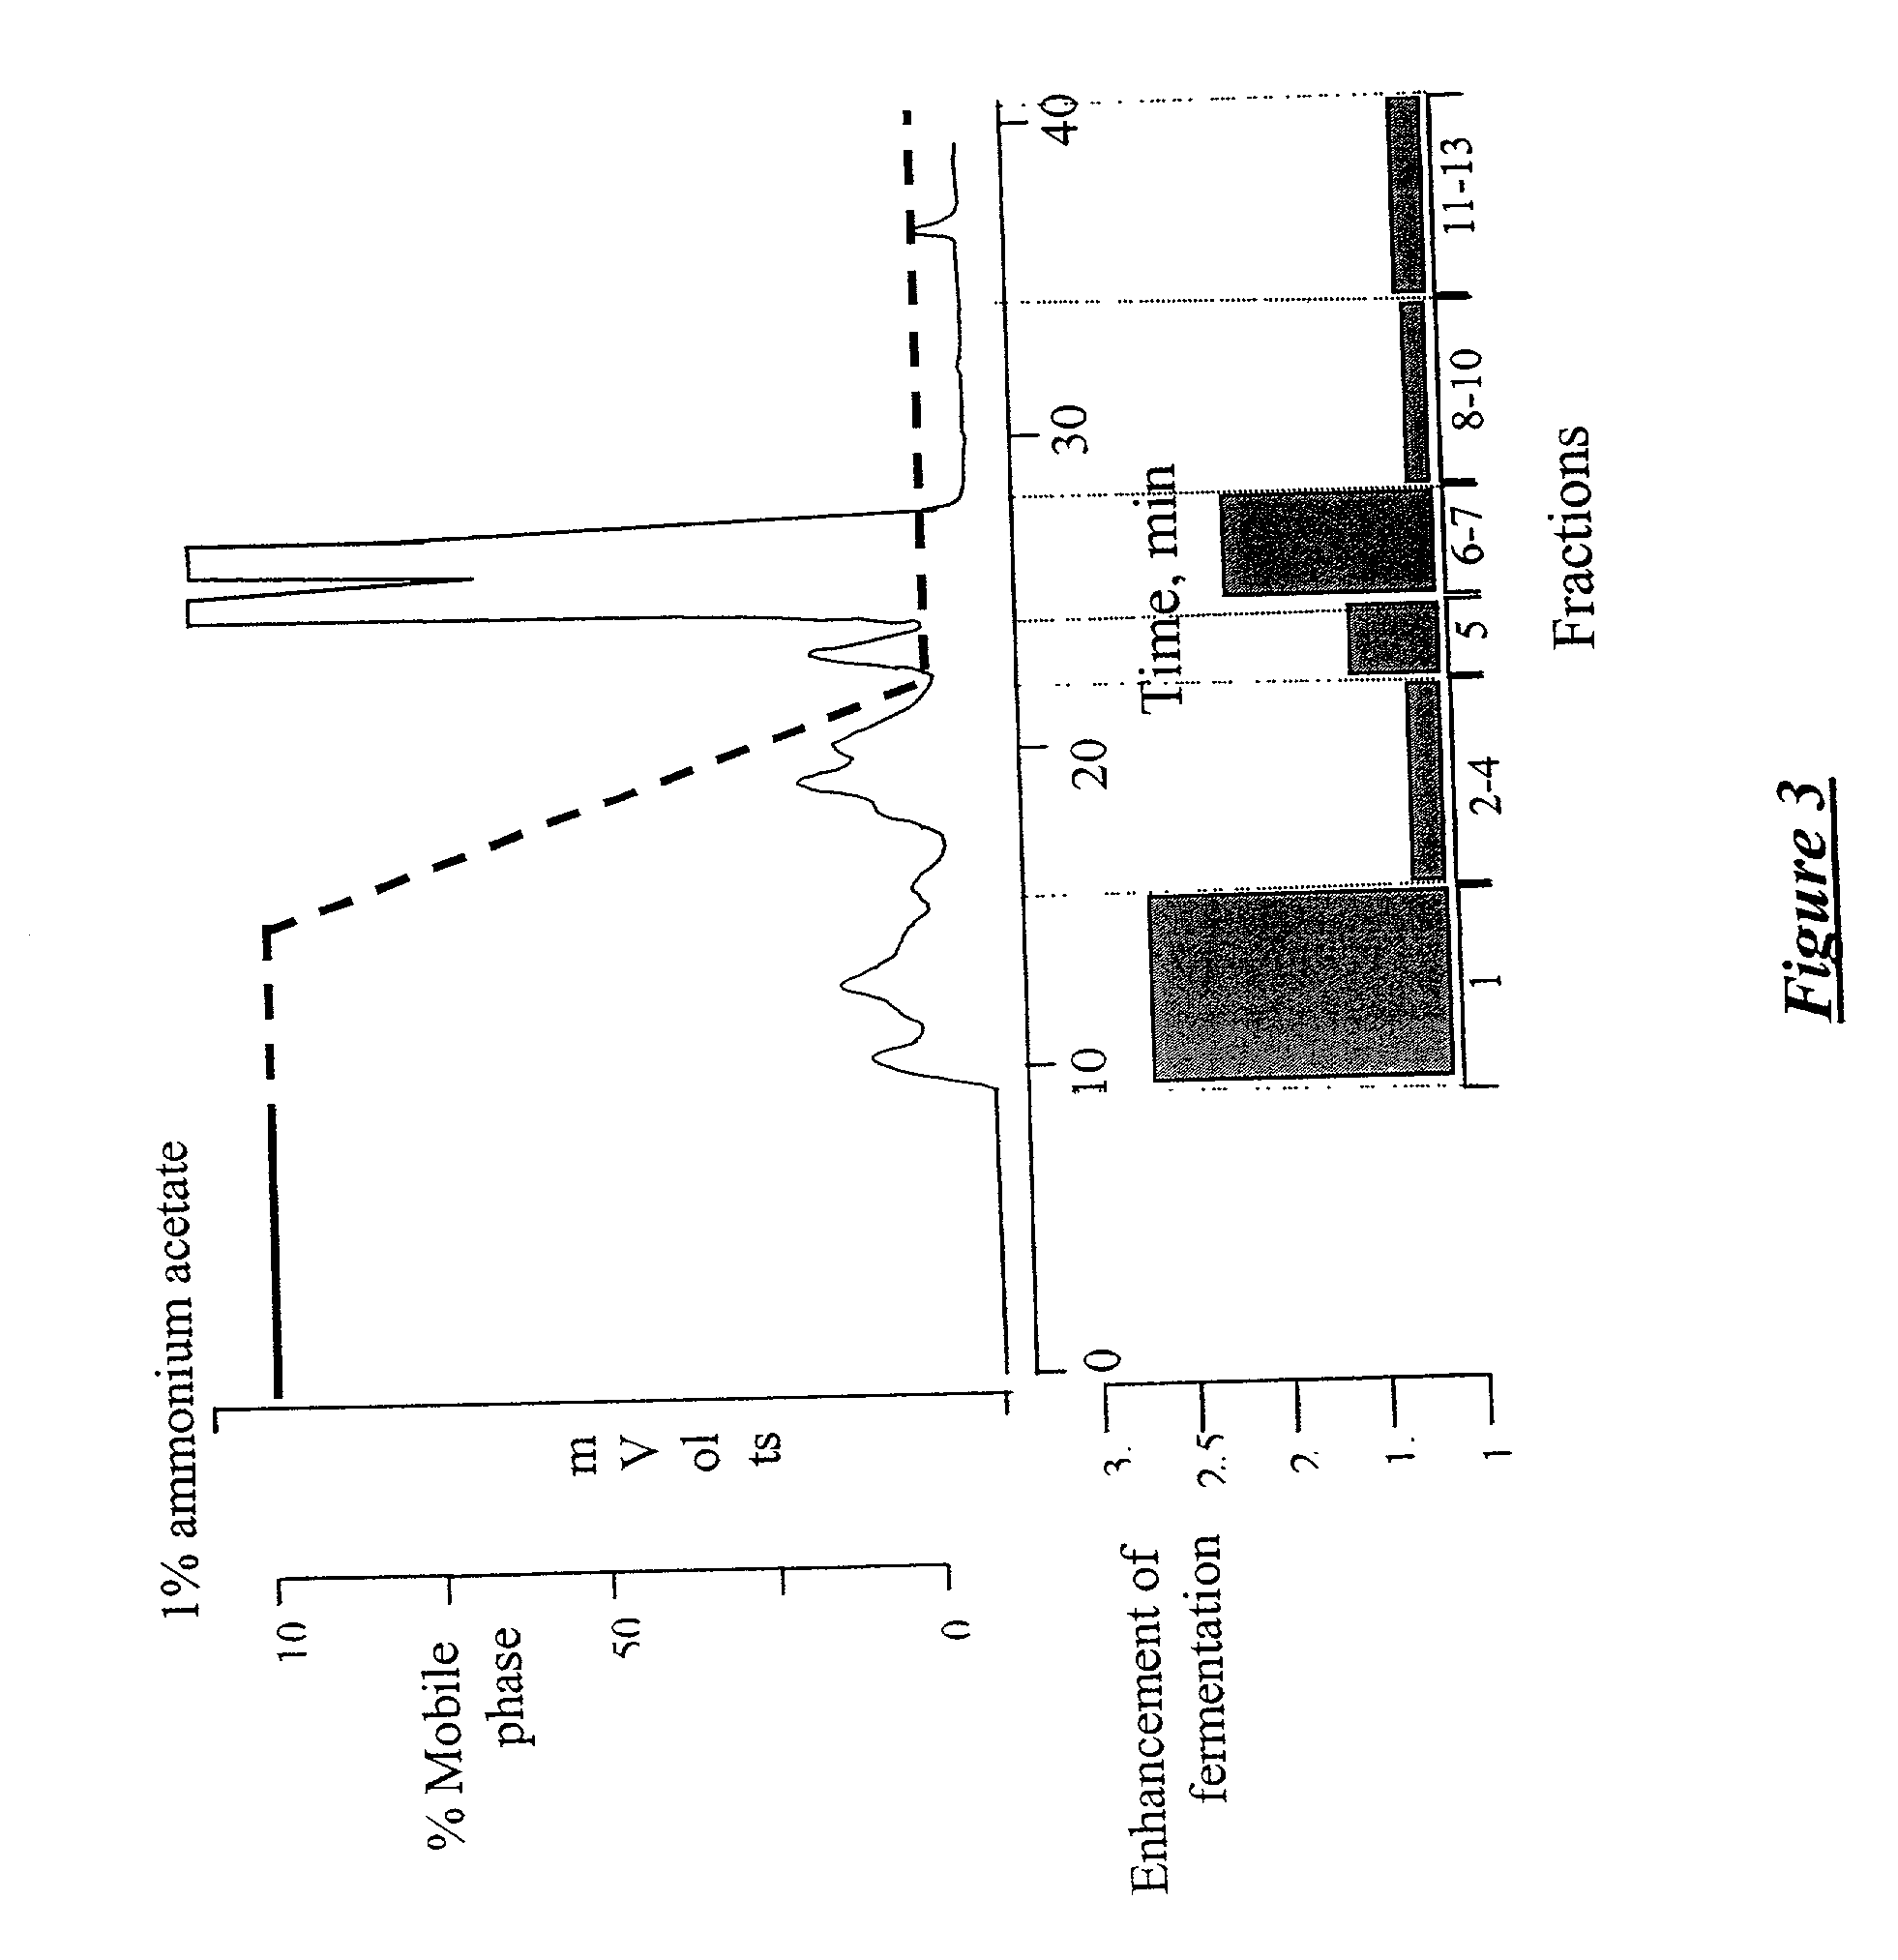 Naturally extracted and synthetic hypoglycemic or hypolipidemic compositions